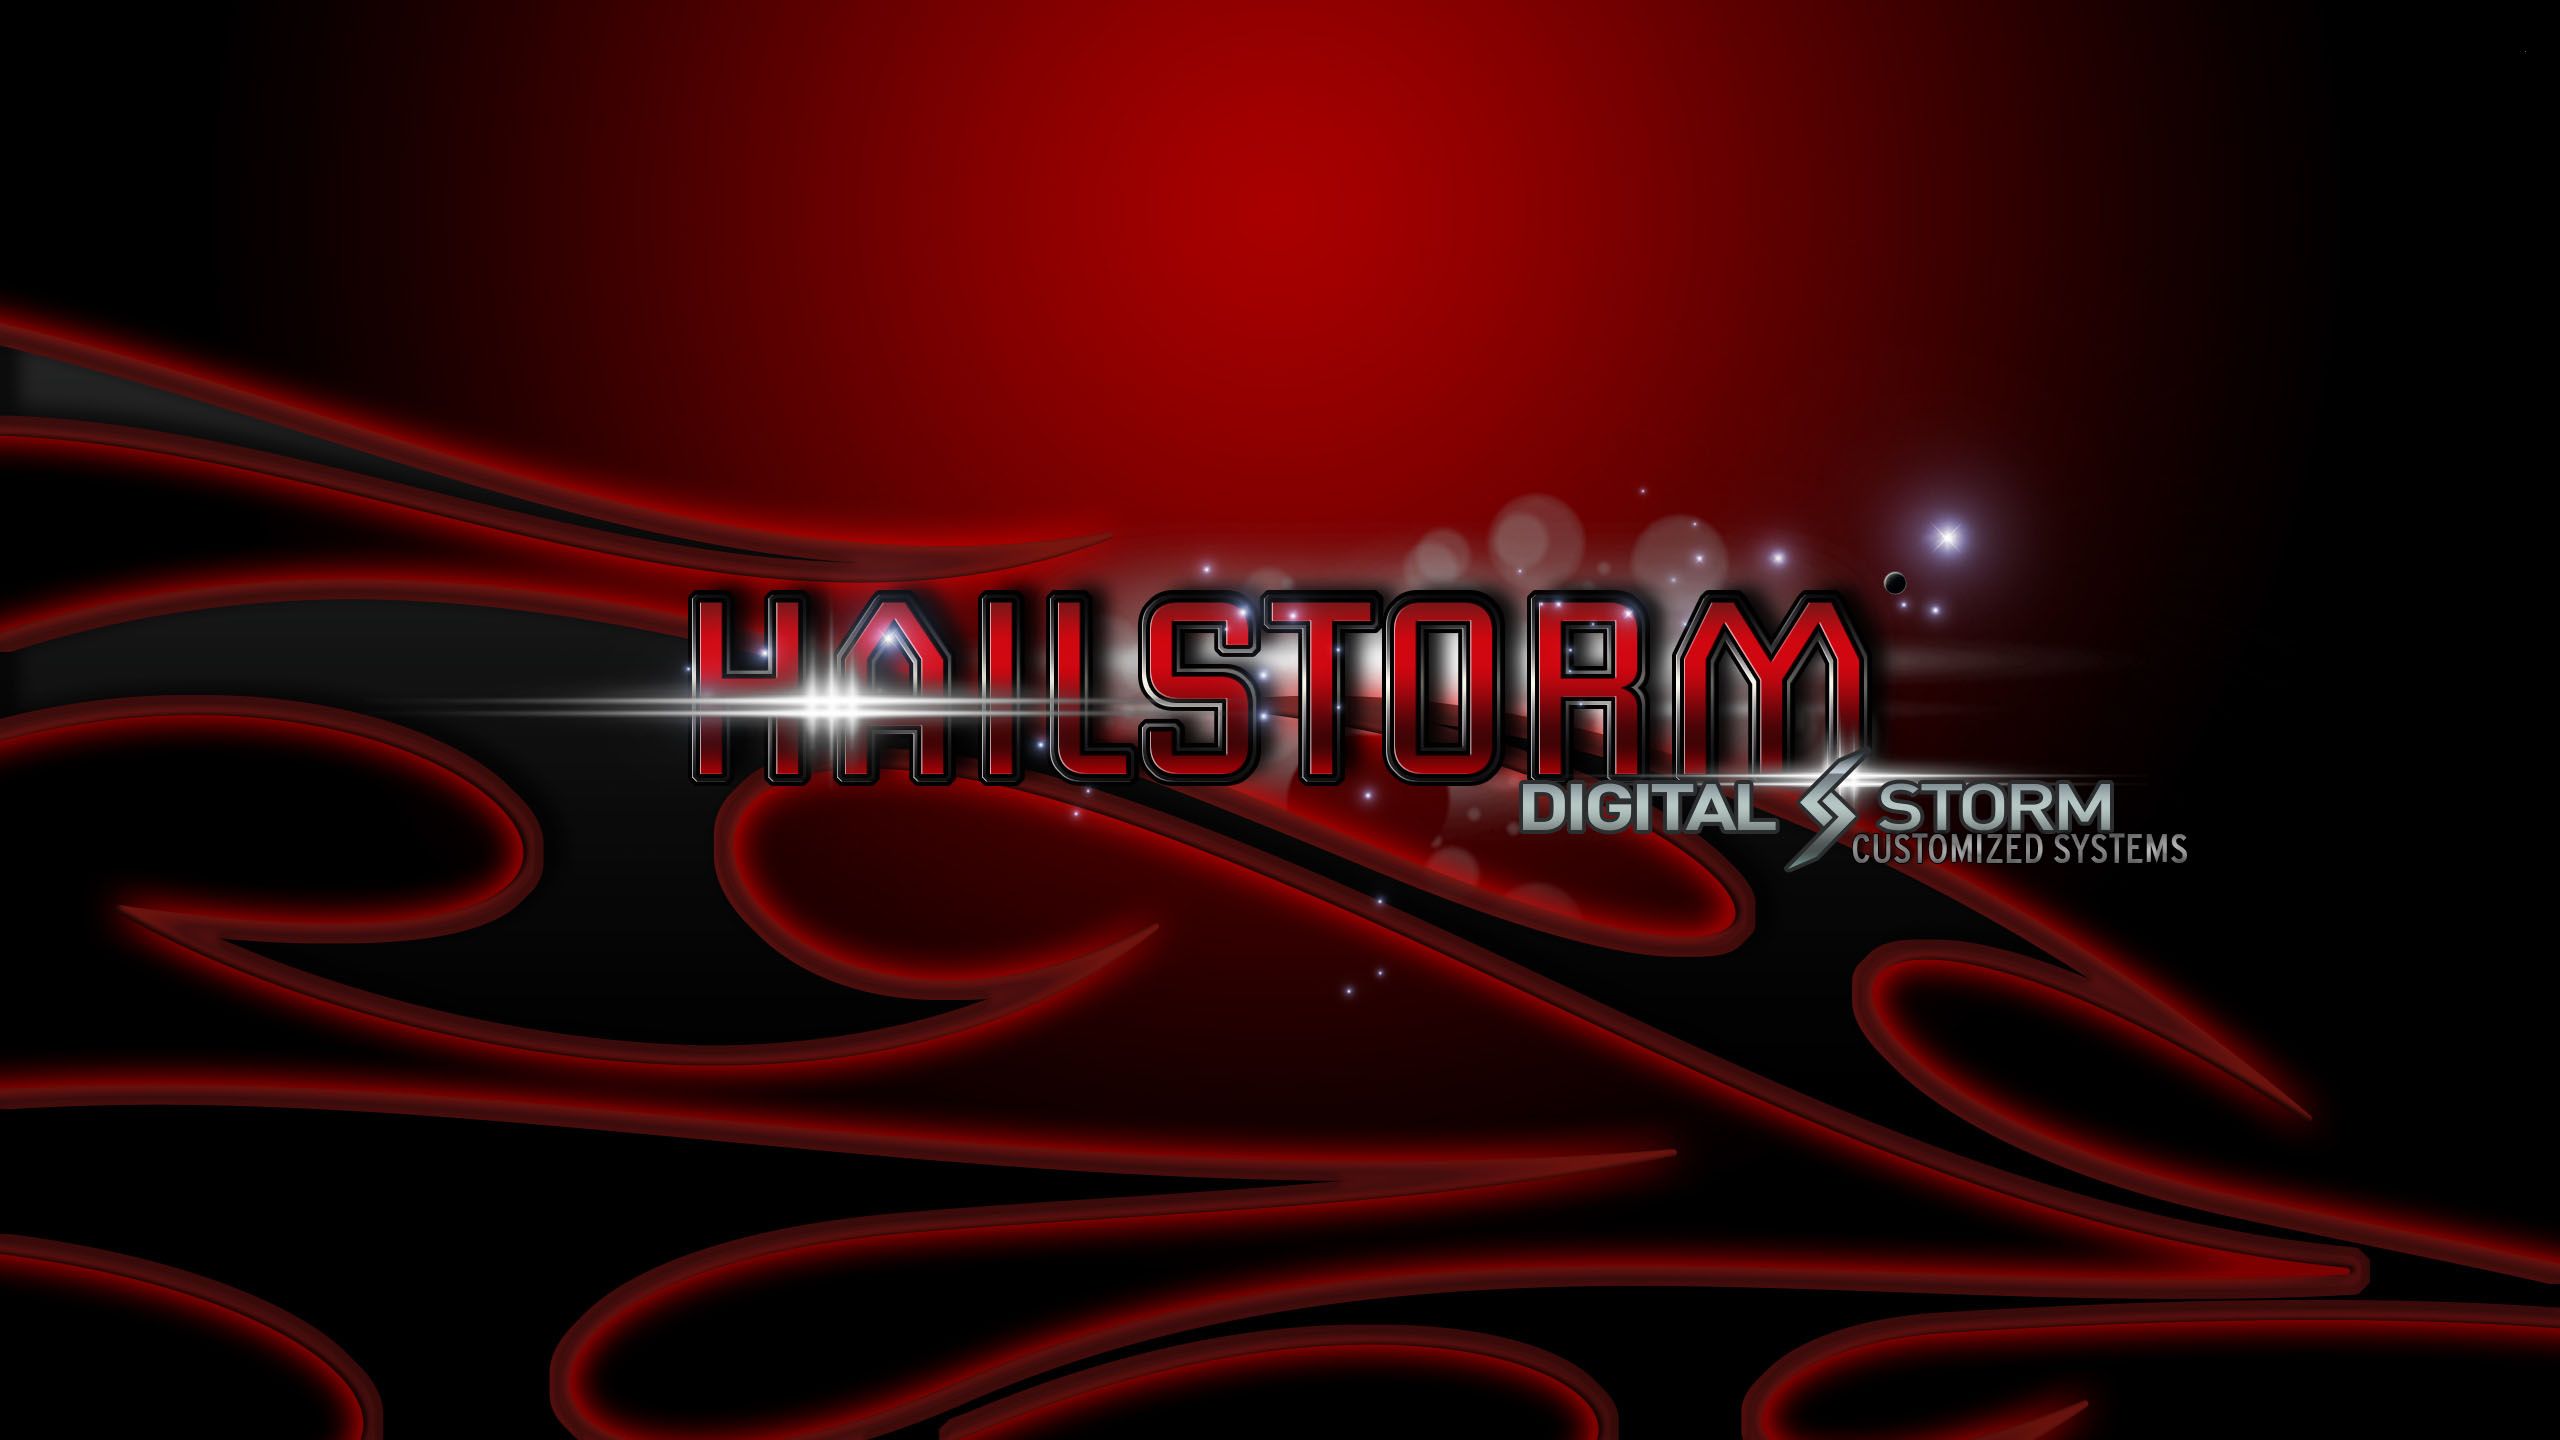 Unofficial Customer Wallpaper. By: Alex Storm Forums